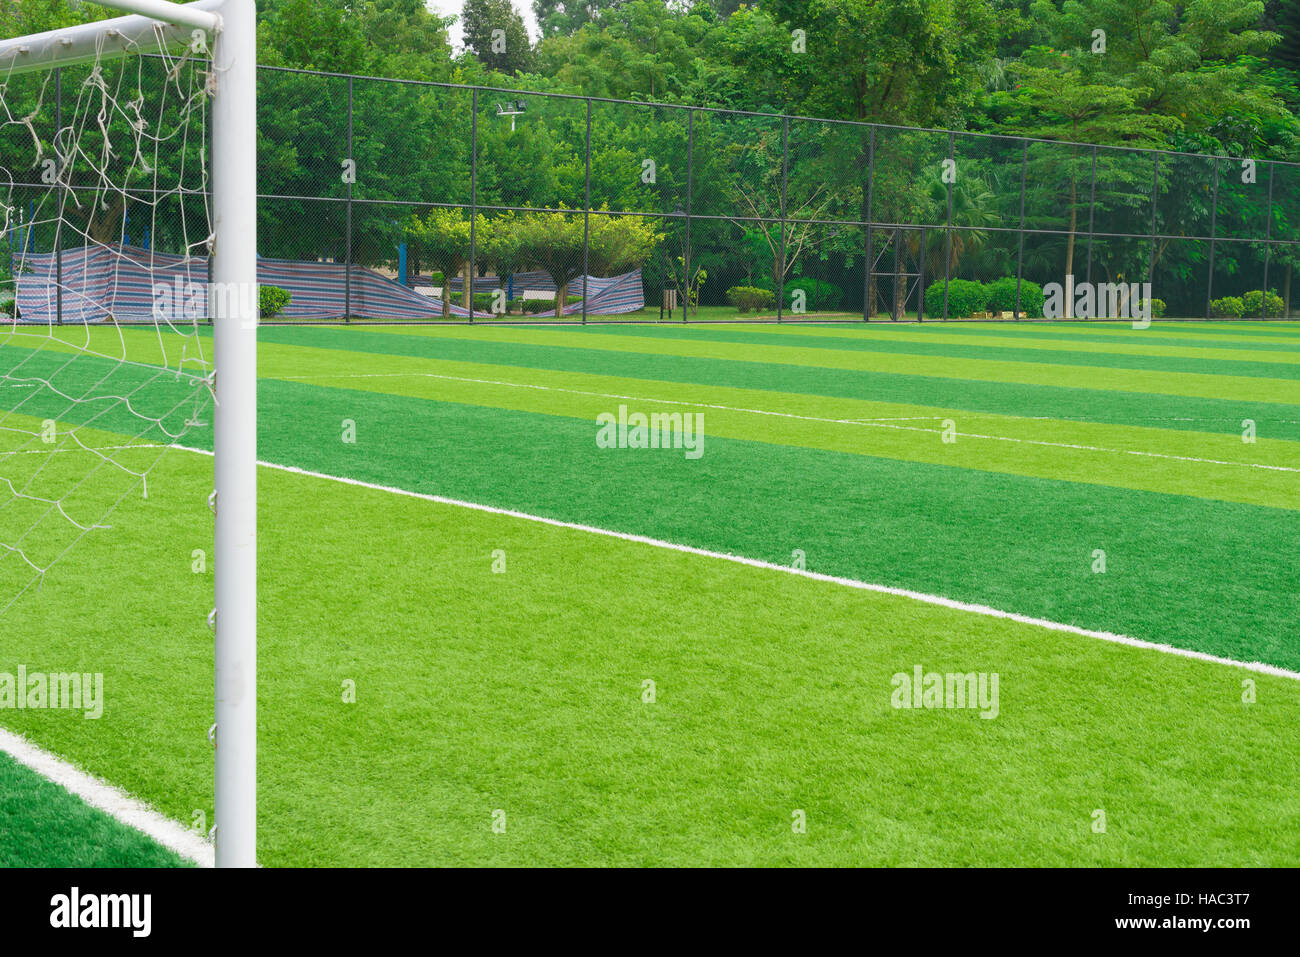 outdoor soccer field in day time Stock Photo